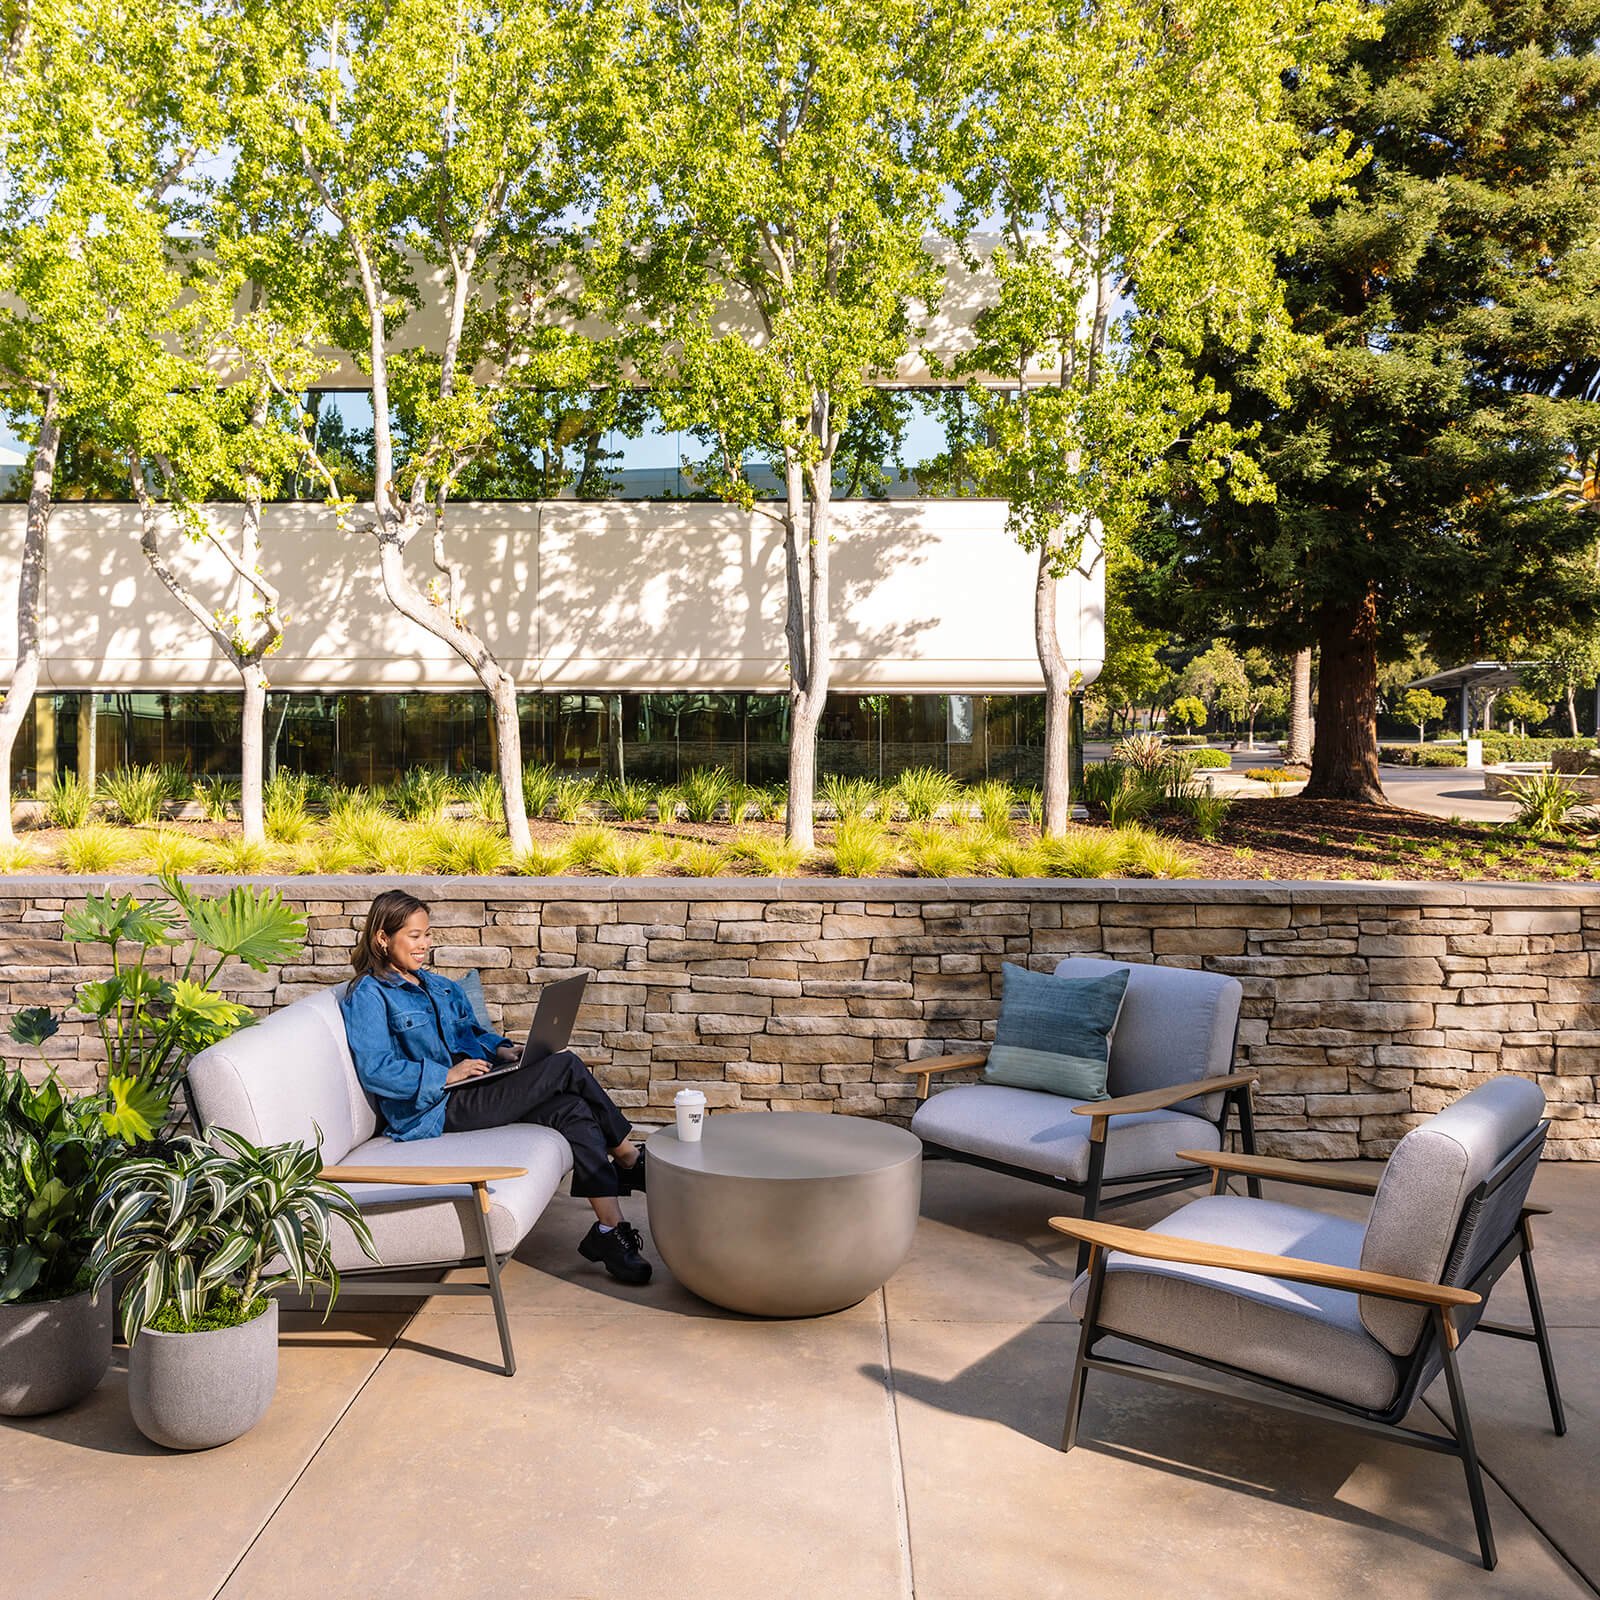  A customer relaxes in one of the comfy outdoor seating areas 